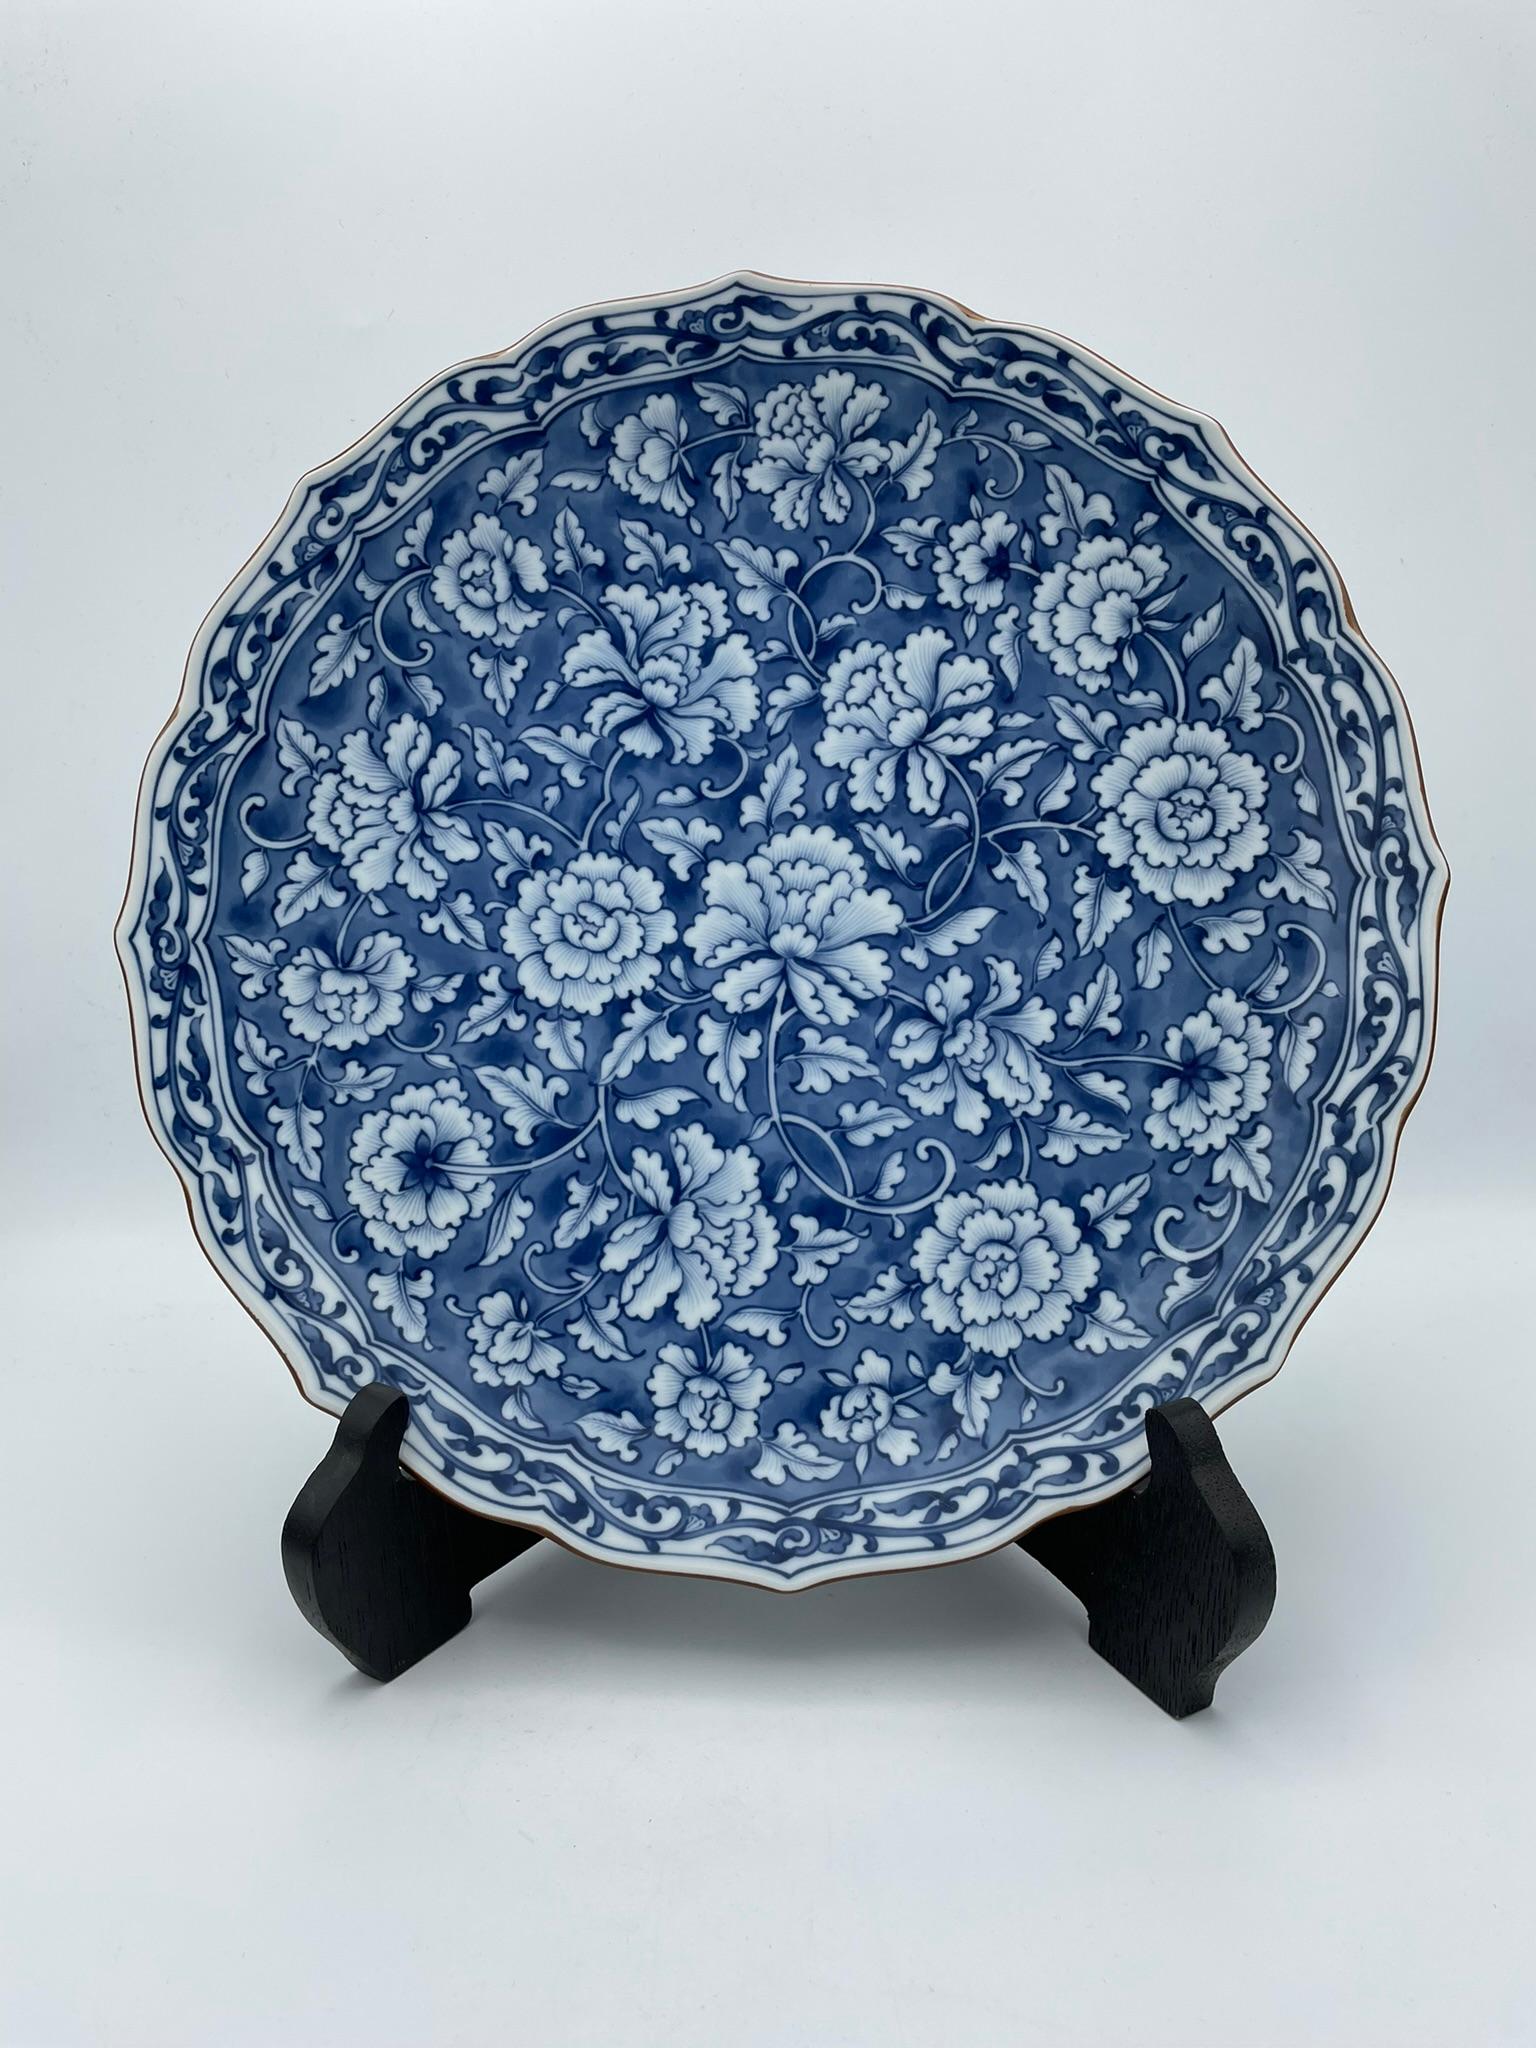 This is a sometsuke plate by Tachikichi (Company name).
It was made around 1970s in Showa era in Kyoto, Japan.
Sometsuke is a ceramic made by painting a pattern with a paint mainly composed of cobalt oxide and then heating it at high temperature